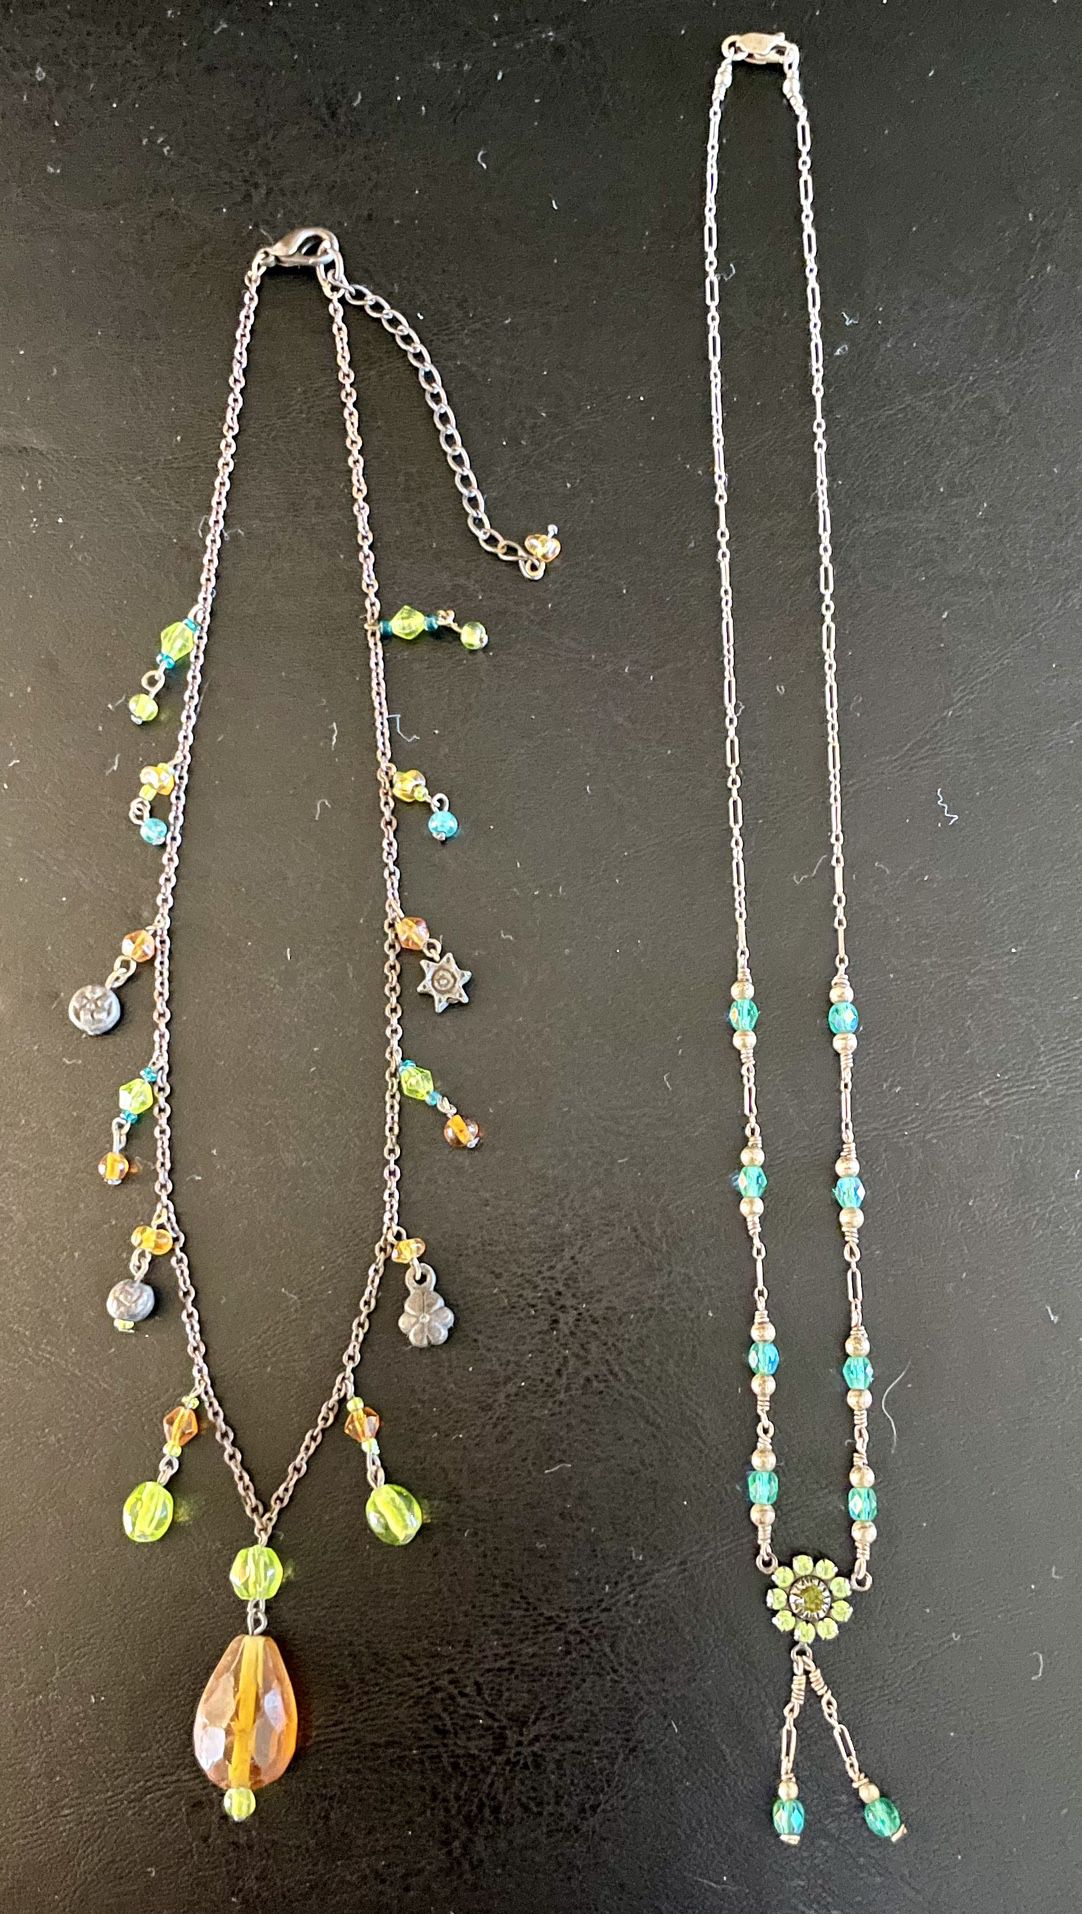 Necklaces. 2 For $4